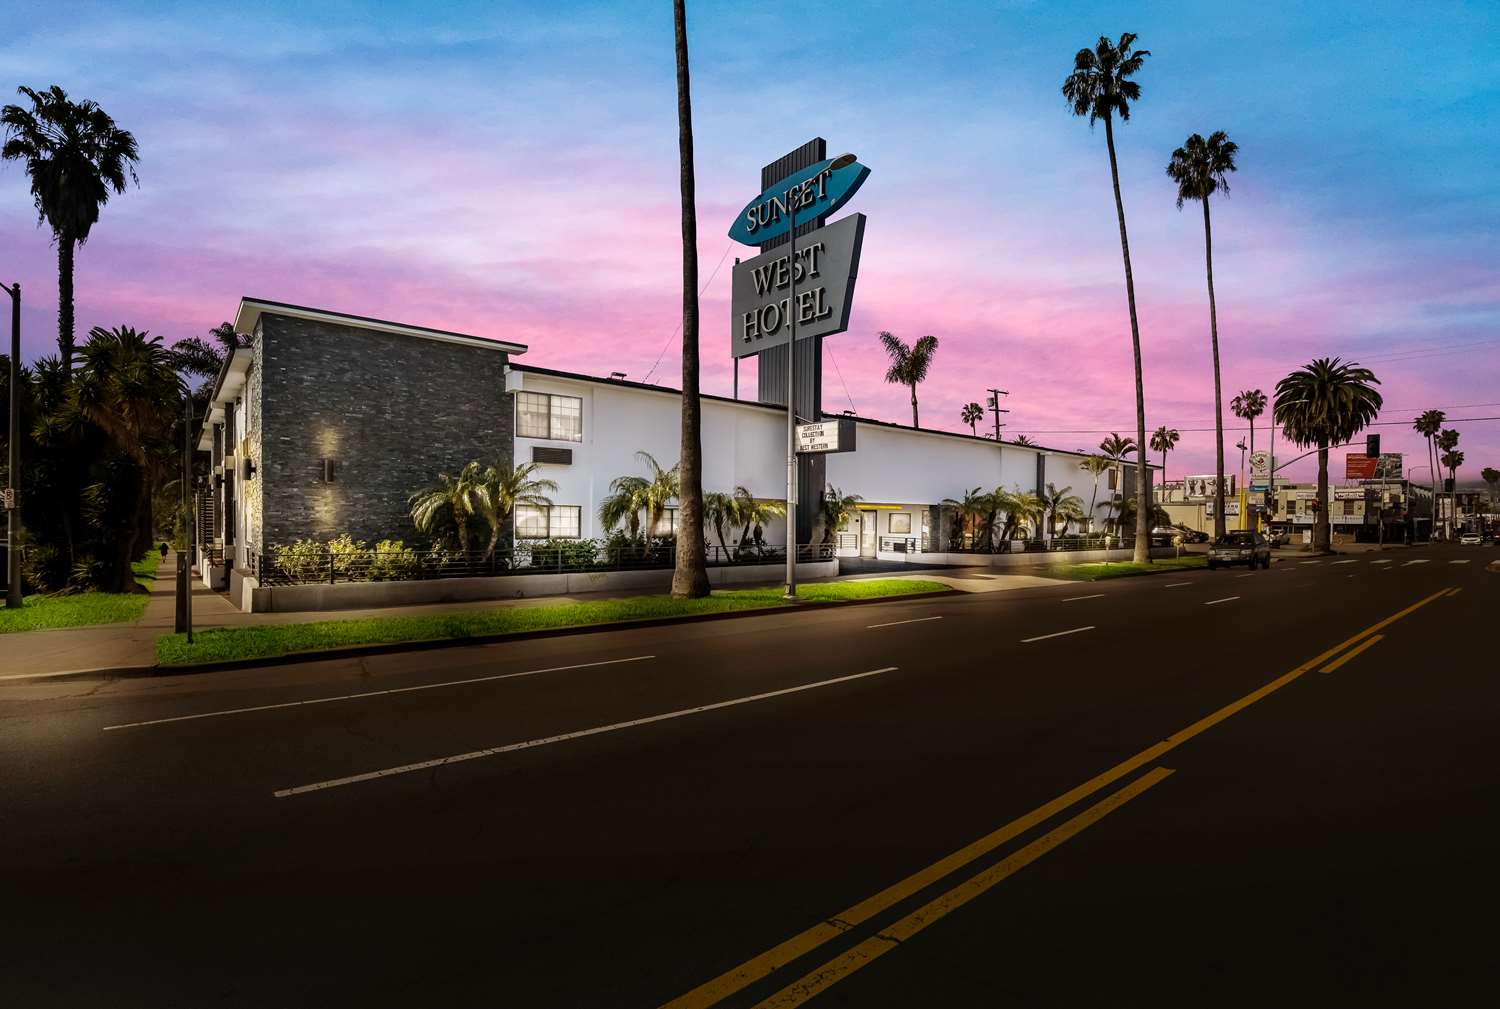 Prime Rodeo Drive Property Sells Twice In 24 Hours For Double Purchase  Price